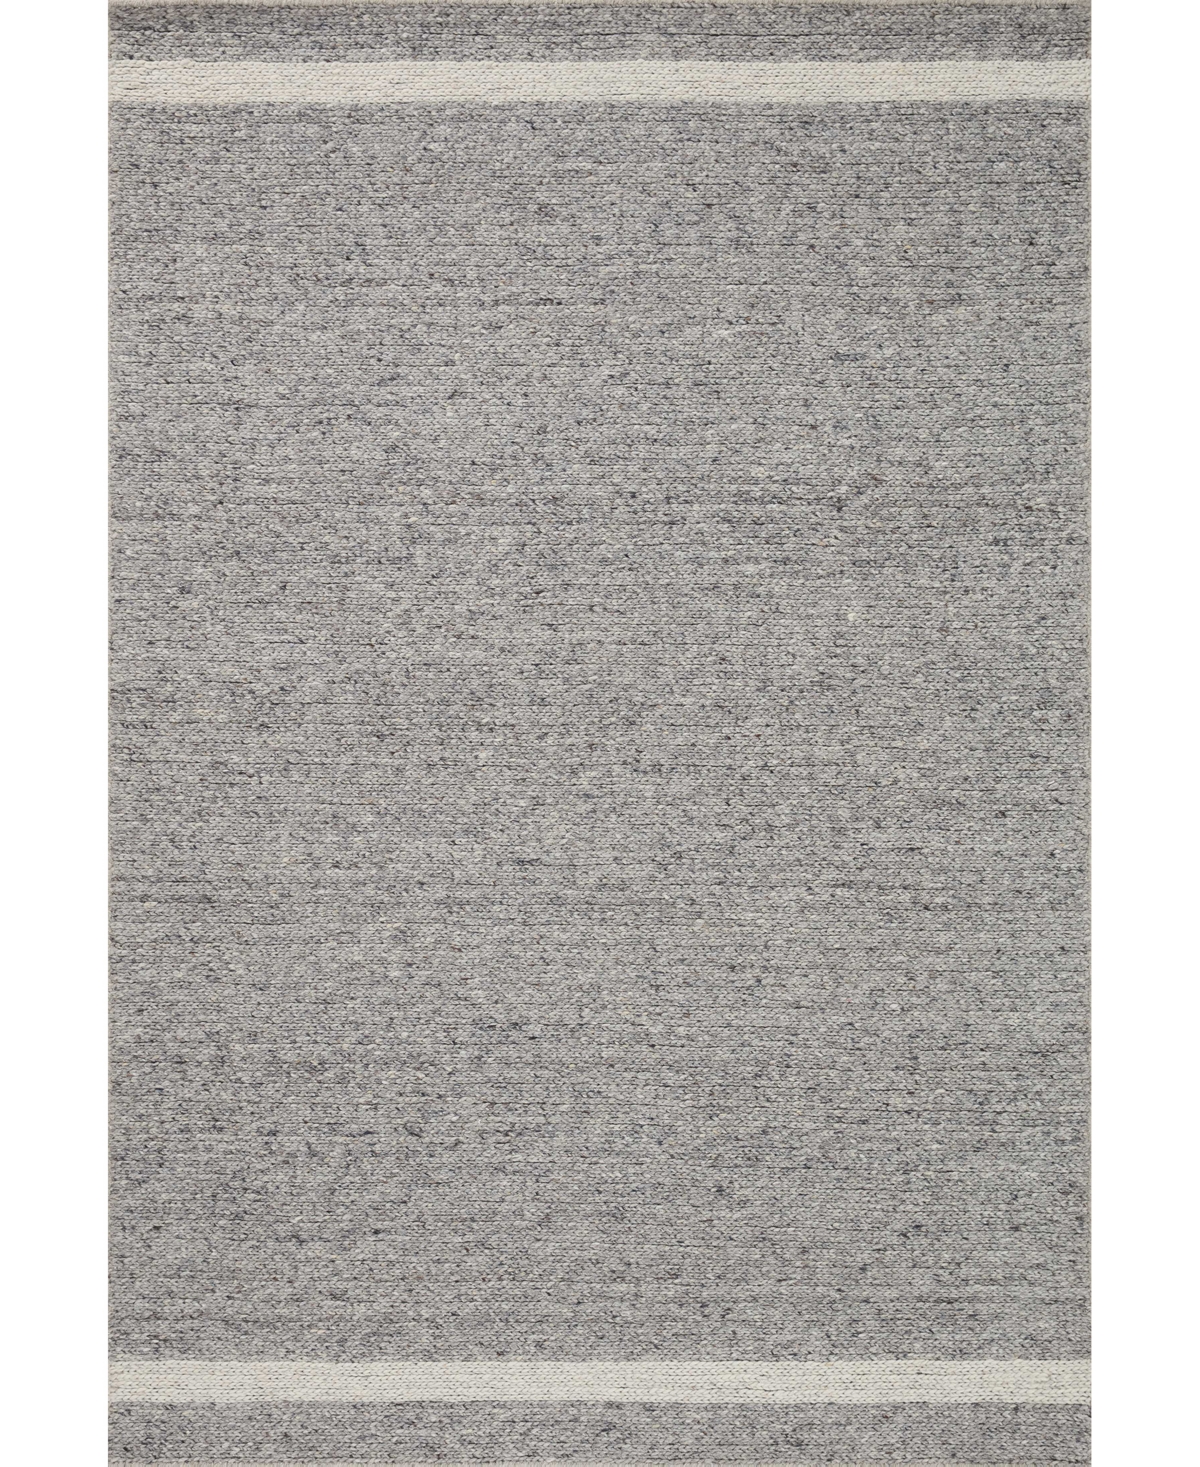 Magnolia Home By Joanna Gaines X Loloi Ashby Ash-04 8'6" X 12' Area Rug In Slate